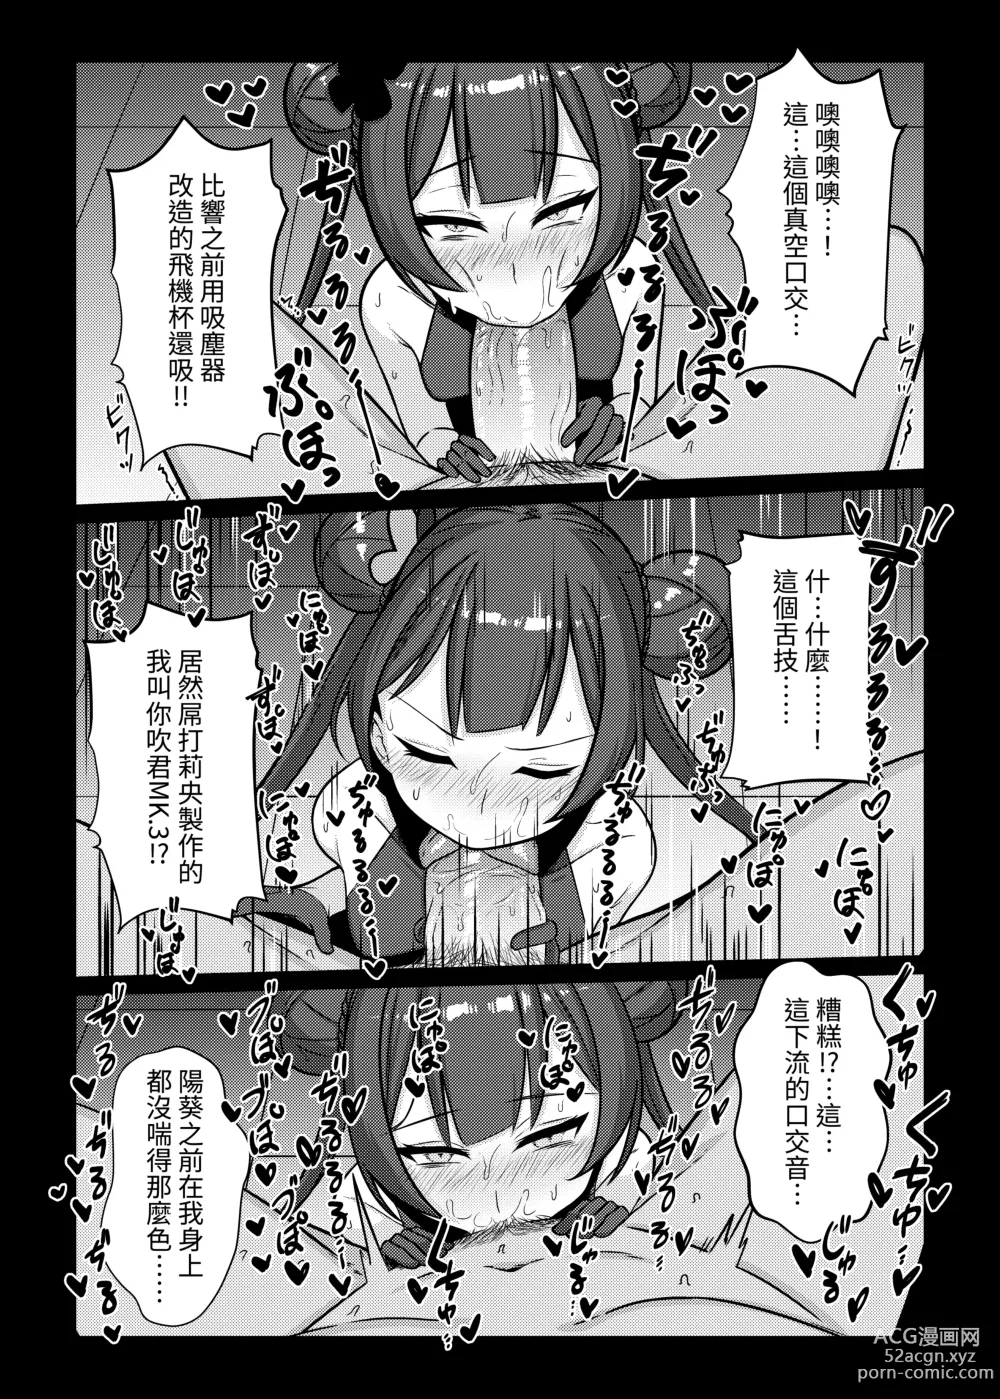 Page 9 of doujinshi 絕命狼師